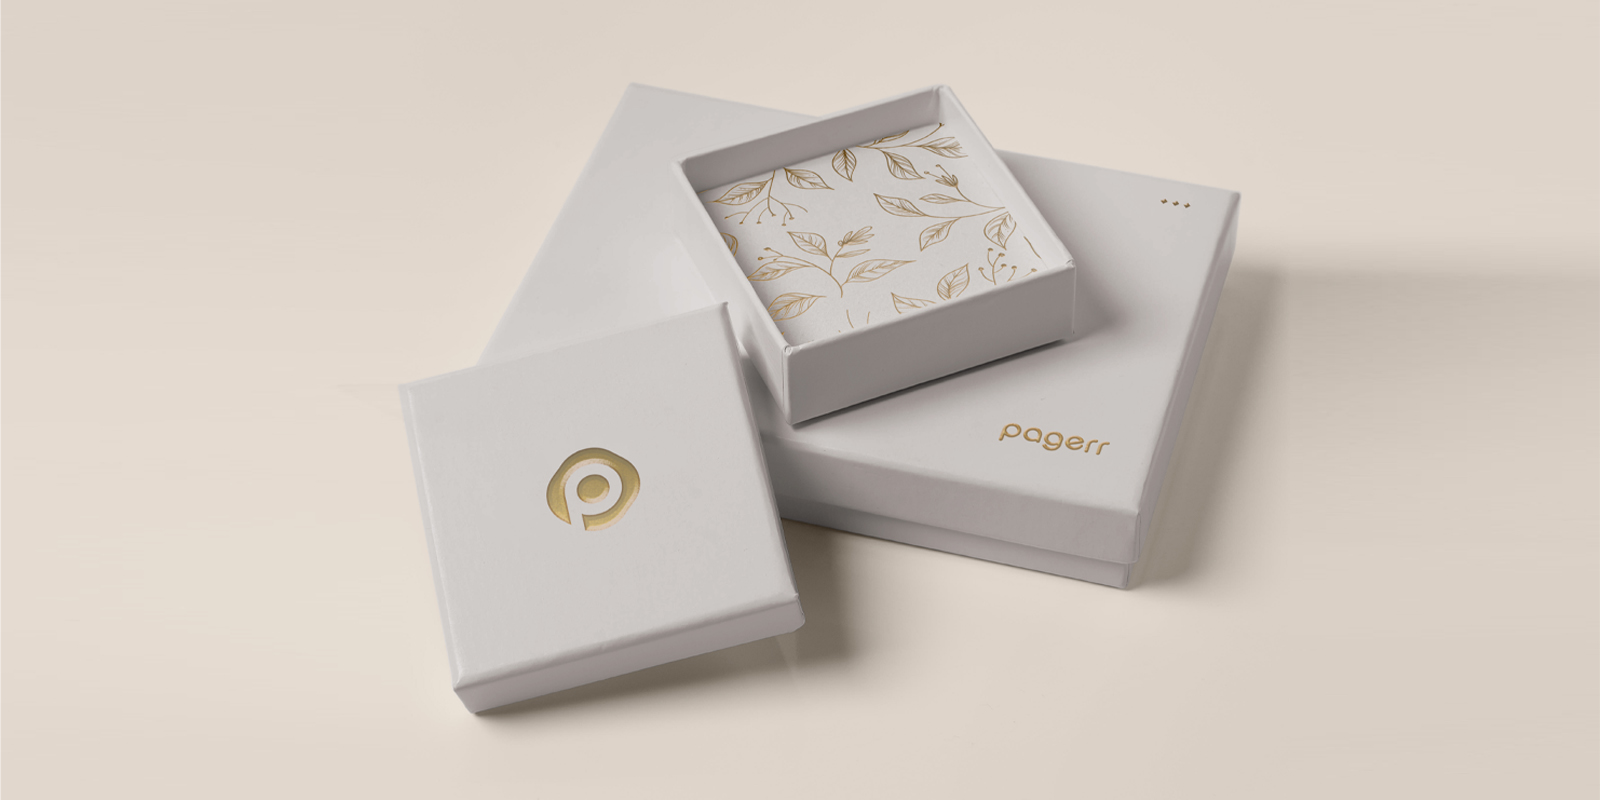 Product boxes in Paris - Print with Pagerr